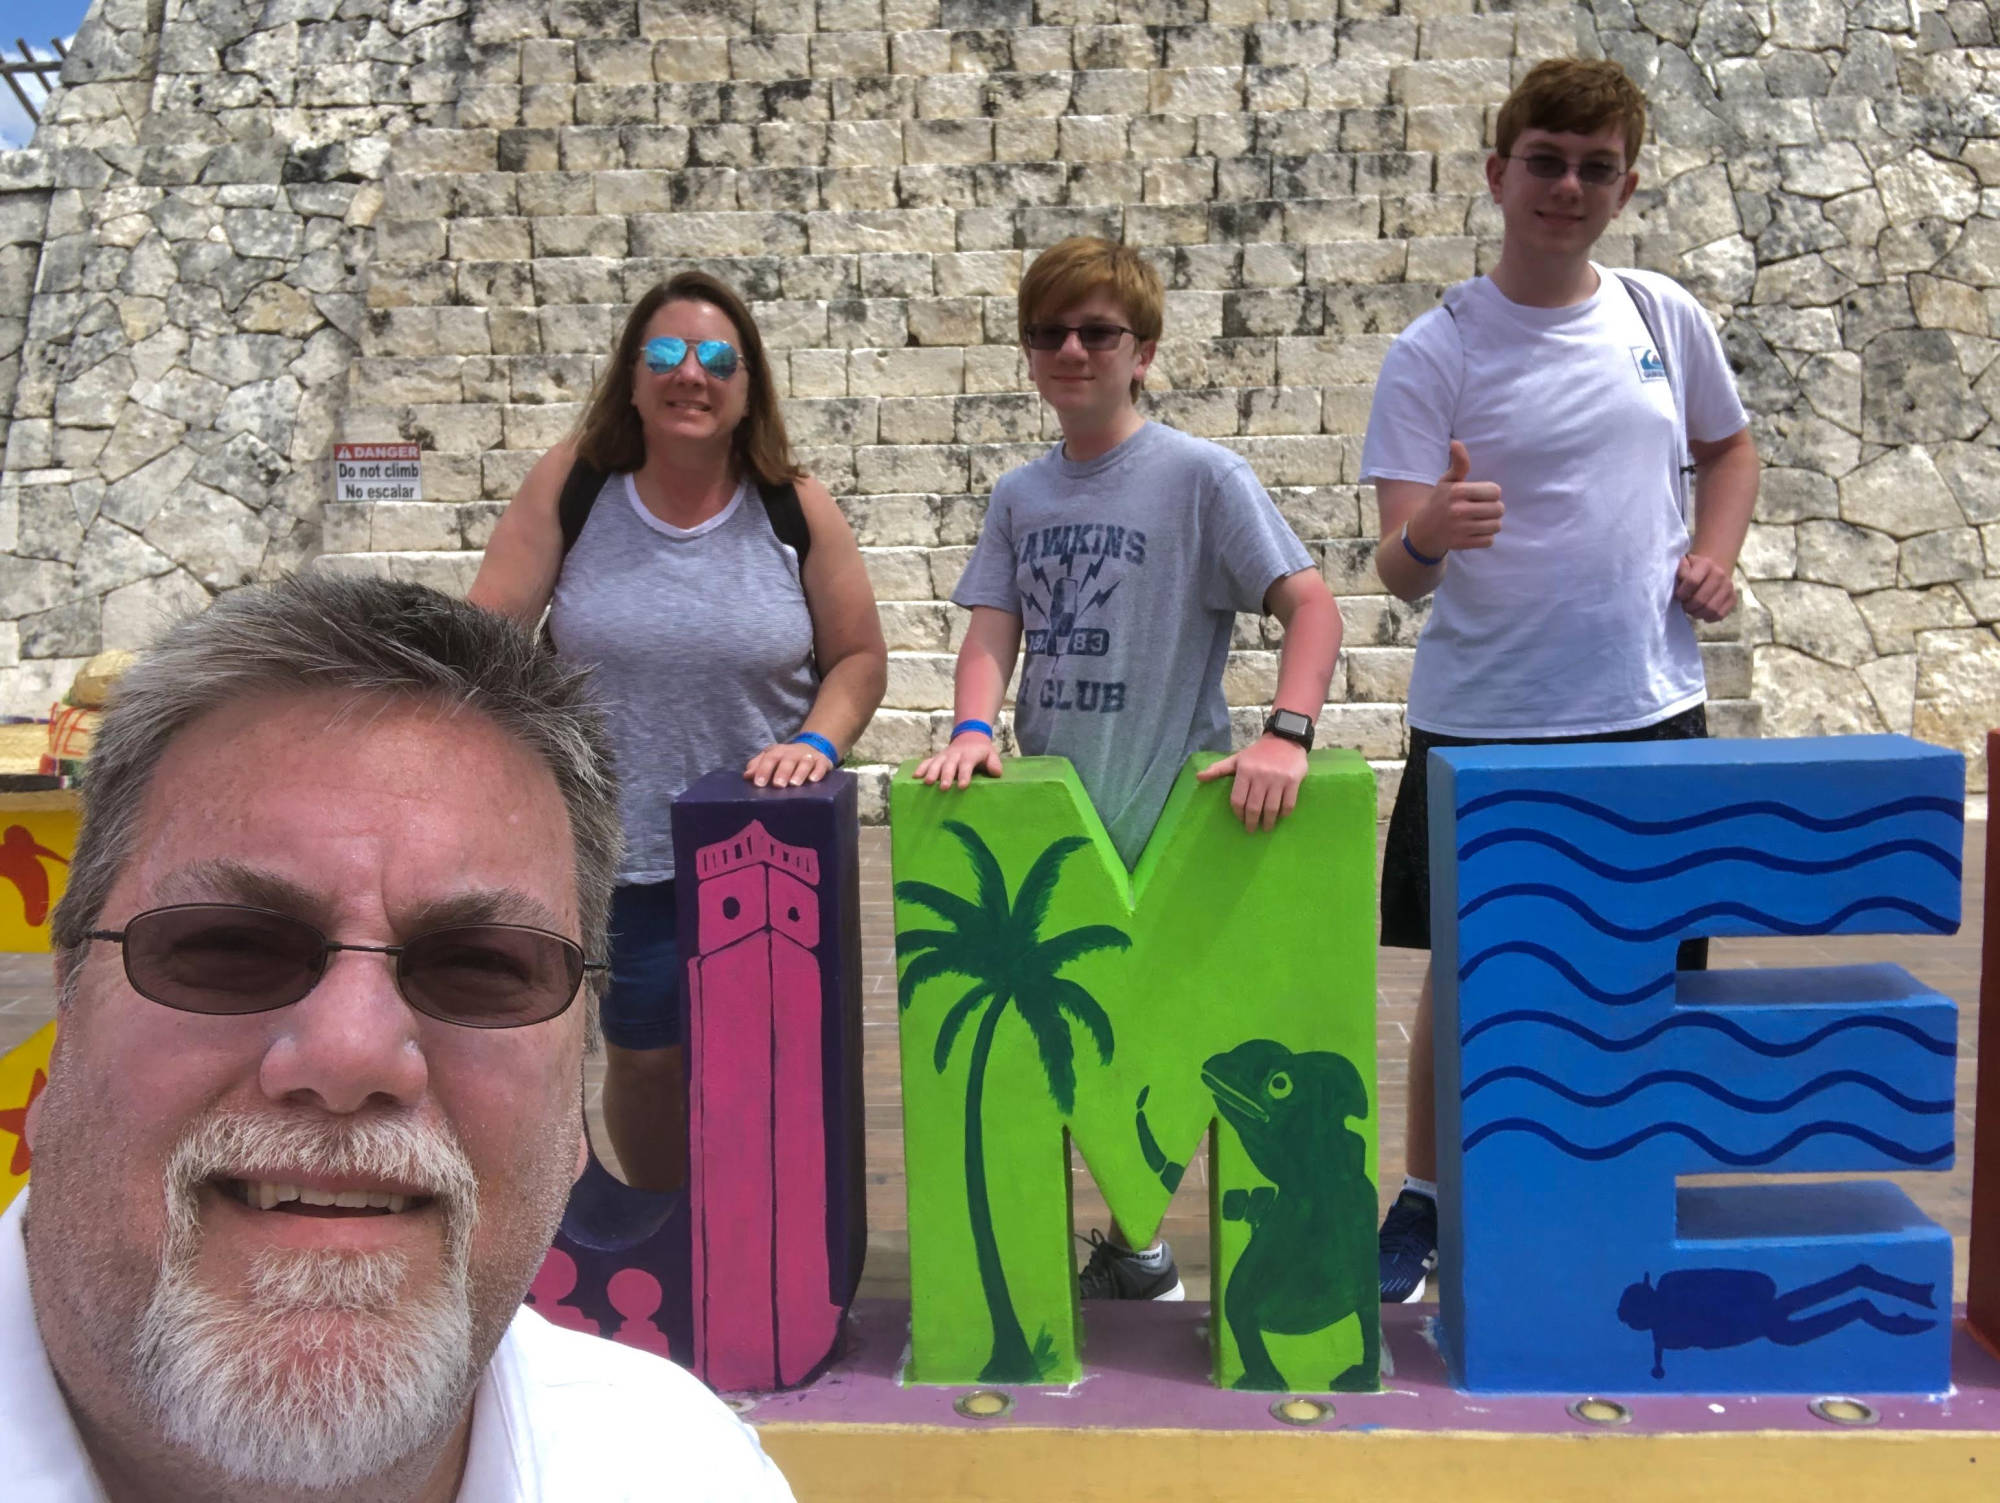 A Photo of David Brodosi and his family posing for a photo in Cozumel Mexico